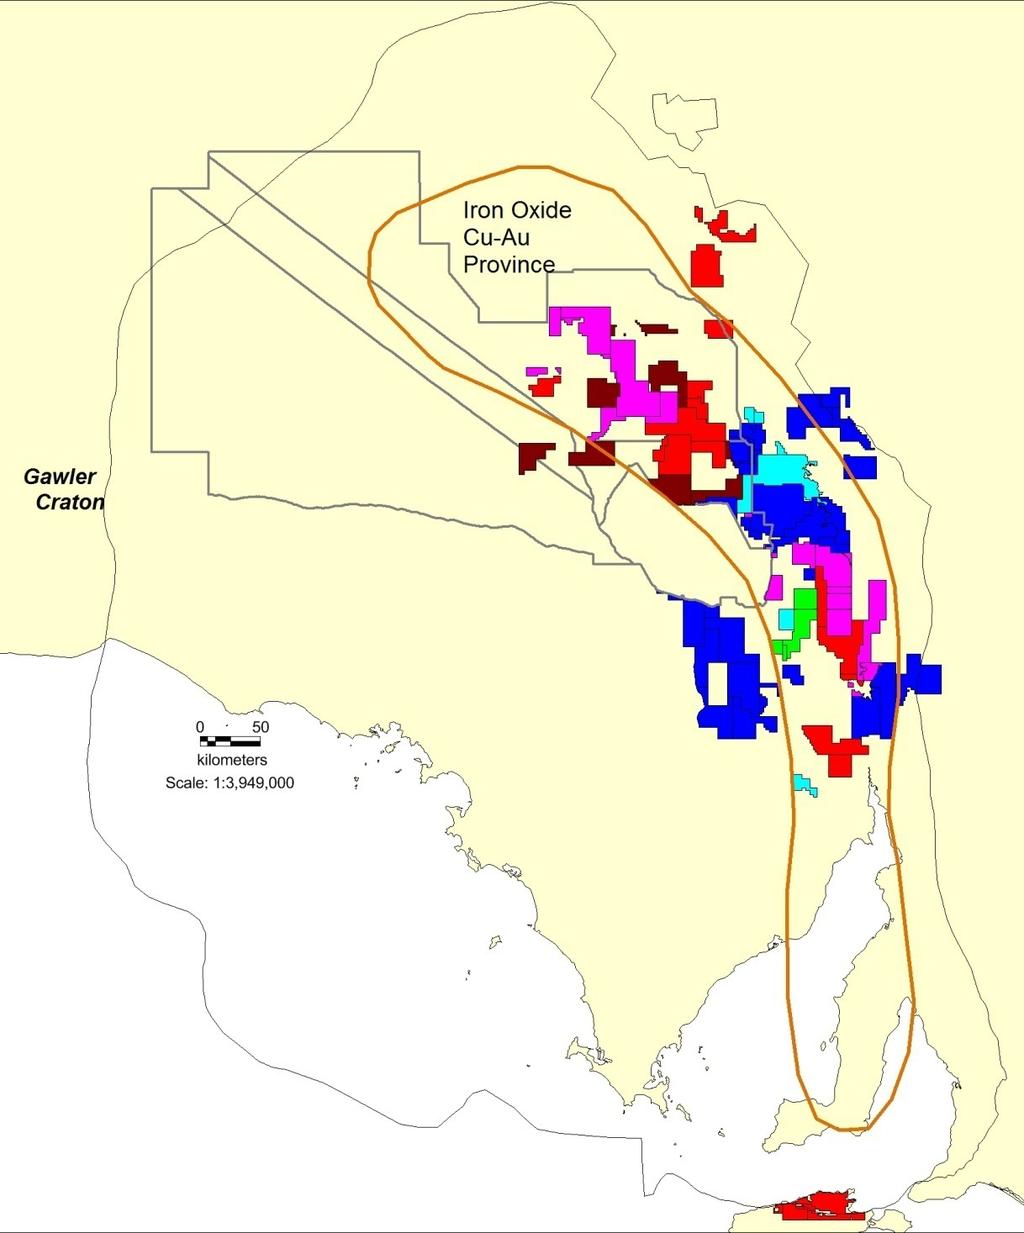 Gawler Craton State of Play IOCG Province BHP Billiton Still largest landholder within Olympic IOCG Province. Very quiet on the exploration front.